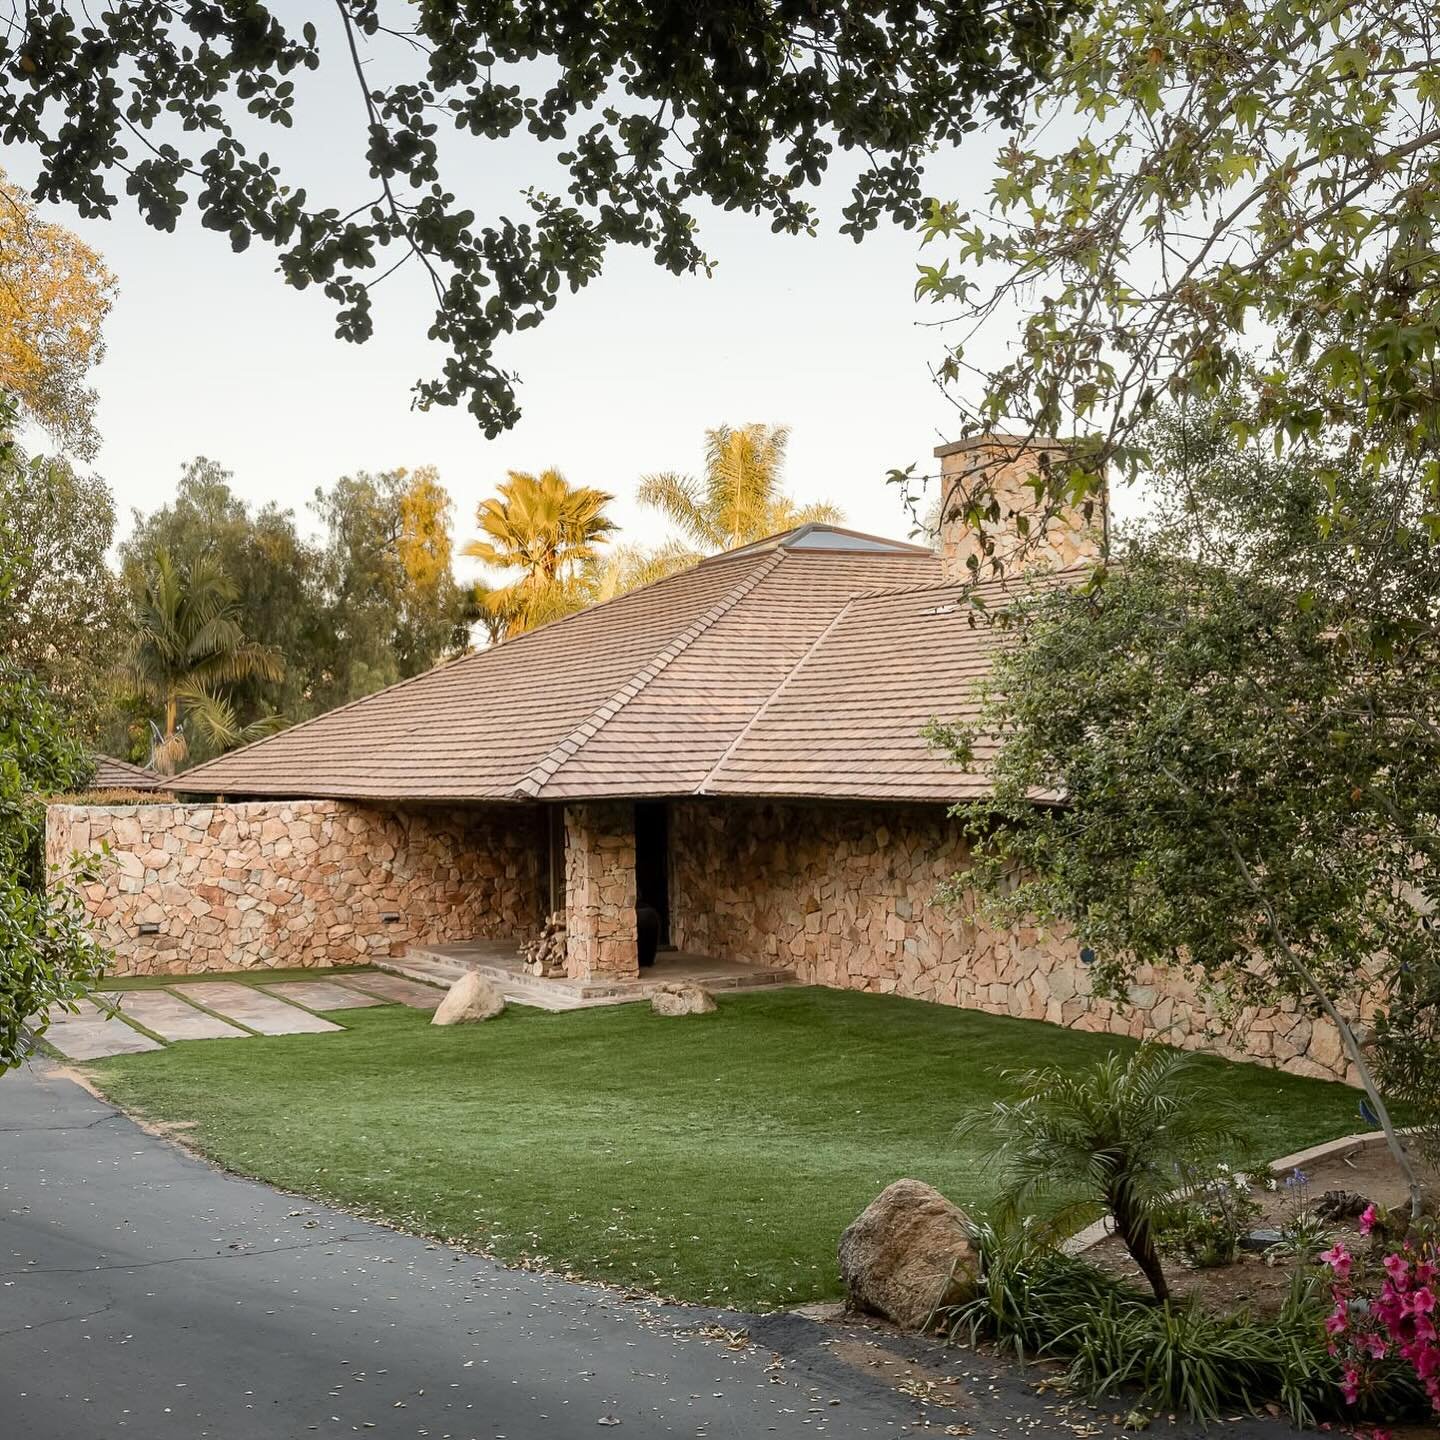 The Weseloh Residence (1977) by James Rodney &lsquo;J.R.&rsquo; Youngson

The panoramic views of the San Pasqual Valley create a breathtaking backdrop for this exclusive sanctuary. The use of natural wood and stone materials throughout the home adds 